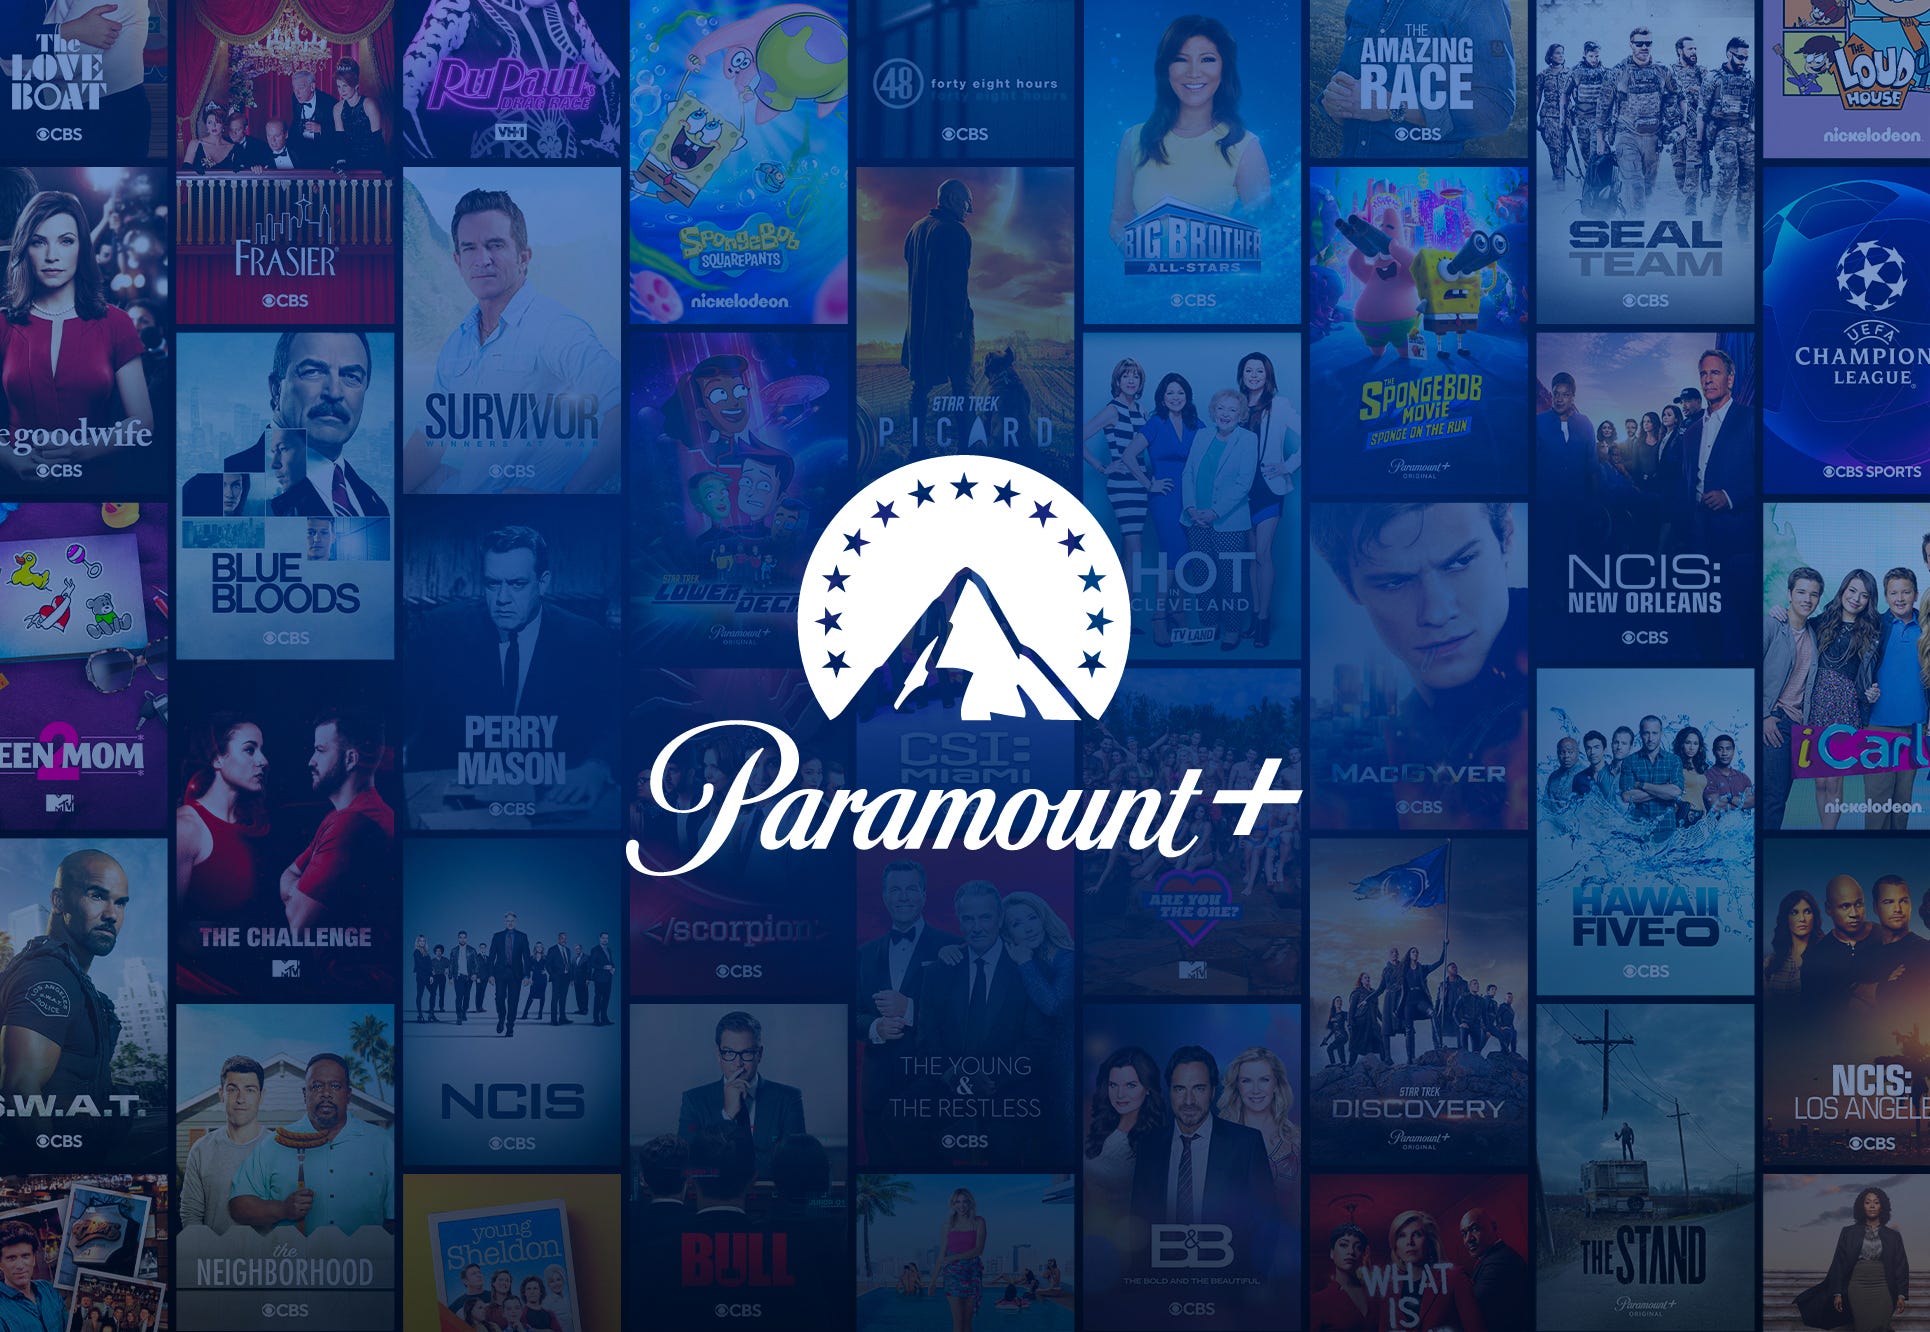 <div class="bi-product-card"><div class="product-card-small"><span><div class="product-card-name"><a href="https://www.paramountplus.com/"><b>Paramount Plus Premium Monthly Plan (ad-free)</b></a></div><div class="product-card-options"><div class="product-card-option"><div class="product-card-button"><a href="https://www.paramountplus.com/"><span>$9.99 FROM PARAMOUNT</span></a></div></div></div></span></div></div><div class="bi-product-card"><div class="product-card-small"><span><div class="product-card-name"><a href="https://www.paramountplus.com/"><b>Paramount Plus Essential Monthly Plan (ad-supported)</b></a></div><div class="product-card-options"><div class="product-card-option"><div class="product-card-button"><a href="https://www.paramountplus.com/"><span>$4.99 FROM PARAMOUNT</span></a></div></div></div></span></div></div><p><strong><a href="https://www.businessinsider.com/reviews/out?u=https%3A%2F%2Fwww.paramountplus.com%2F" rel="nofollow noopener sponsored nofollow sponsored">Paramount Plus</a> is a fantastic destination for classic cable TV shows, with potential for even more value in the future.</strong></p><ul><li><a href="https://www.businessinsider.com/reviews/out?u=https%3A%2F%2Fwww.paramountplus.com%2F" rel="nofollow noopener sponsored nofollow sponsored nofollow sponsored"><strong>Paramount Plus (Essential)</strong></a>: $5 a month or $50 a year for ad-supported streaming. </li><li><a href="https://www.businessinsider.com/reviews/out?u=https%3A%2F%2Fwww.paramountplus.com%2F" rel="nofollow noopener sponsored nofollow sponsored nofollow sponsored"><strong>Paramount Plus (Premium)</strong></a>: $10 a month or $100 per year for commercial-free streaming and live CBS.</li><li><strong>Read our <a href="https://www.businessinsider.com/paramount-plus-streaming-service" rel="noopener">Paramount Plus guide</a> and our <a href="https://www.businessinsider.com/paramount-plus-review" rel="noopener">Paramount Plus review</a></strong></li></ul><p><strong>Pros:</strong> Huge library of classic TV shows, live CBS with Premium plan, new Paramount films 45 days after theater release</p><p><strong>Cons:</strong> Less original content than the competition</p><p><a href="https://www.businessinsider.com/reviews/out?u=https%3A%2F%2Fwww.paramountplus.com%2F" rel="nofollow noopener sponsored nofollow sponsored">Paramount Plus</a> is a new on-demand streaming service from ViacomCBS, replacing CBS All Access. The platform gives viewers access to the live CBS TV channel (Premium Plan only), along with a large collection of TV shows and movies. </p><p>In addition to CBS series, Paramount Plus draws programming from Viacom cable channels like MTV, Comedy Central, and Nickelodeon. Paramount Plus is also home to exclusive content like the <a href="https://www.businessinsider.com/guides/streaming/how-to-watch-1883-yellowstone-prequel" rel="noopener">"Yellowstone" spin-off "1883,"</a> a reboot of "iCarly" and several "Star Trek" shows.</p><p>The streaming service hosts newly released Paramount movies as soon as 45 days after they hit theaters. "<a href="https://www.businessinsider.com/where-to-watch-quiet-place-2" rel="noopener">A Quiet Place Part II</a>" was the first film to get an early release on the service. "The Spongebob Movie: Sponge on the Run" was a launch title for Paramount Plus, and "Mission Impossible 7" is due out next year.</p><p>Sports fans can also tune into local NFL games broadcast on CBS, as well as UEFA soccer matches and March Madness college basketball matchups when each season is in session. </p>